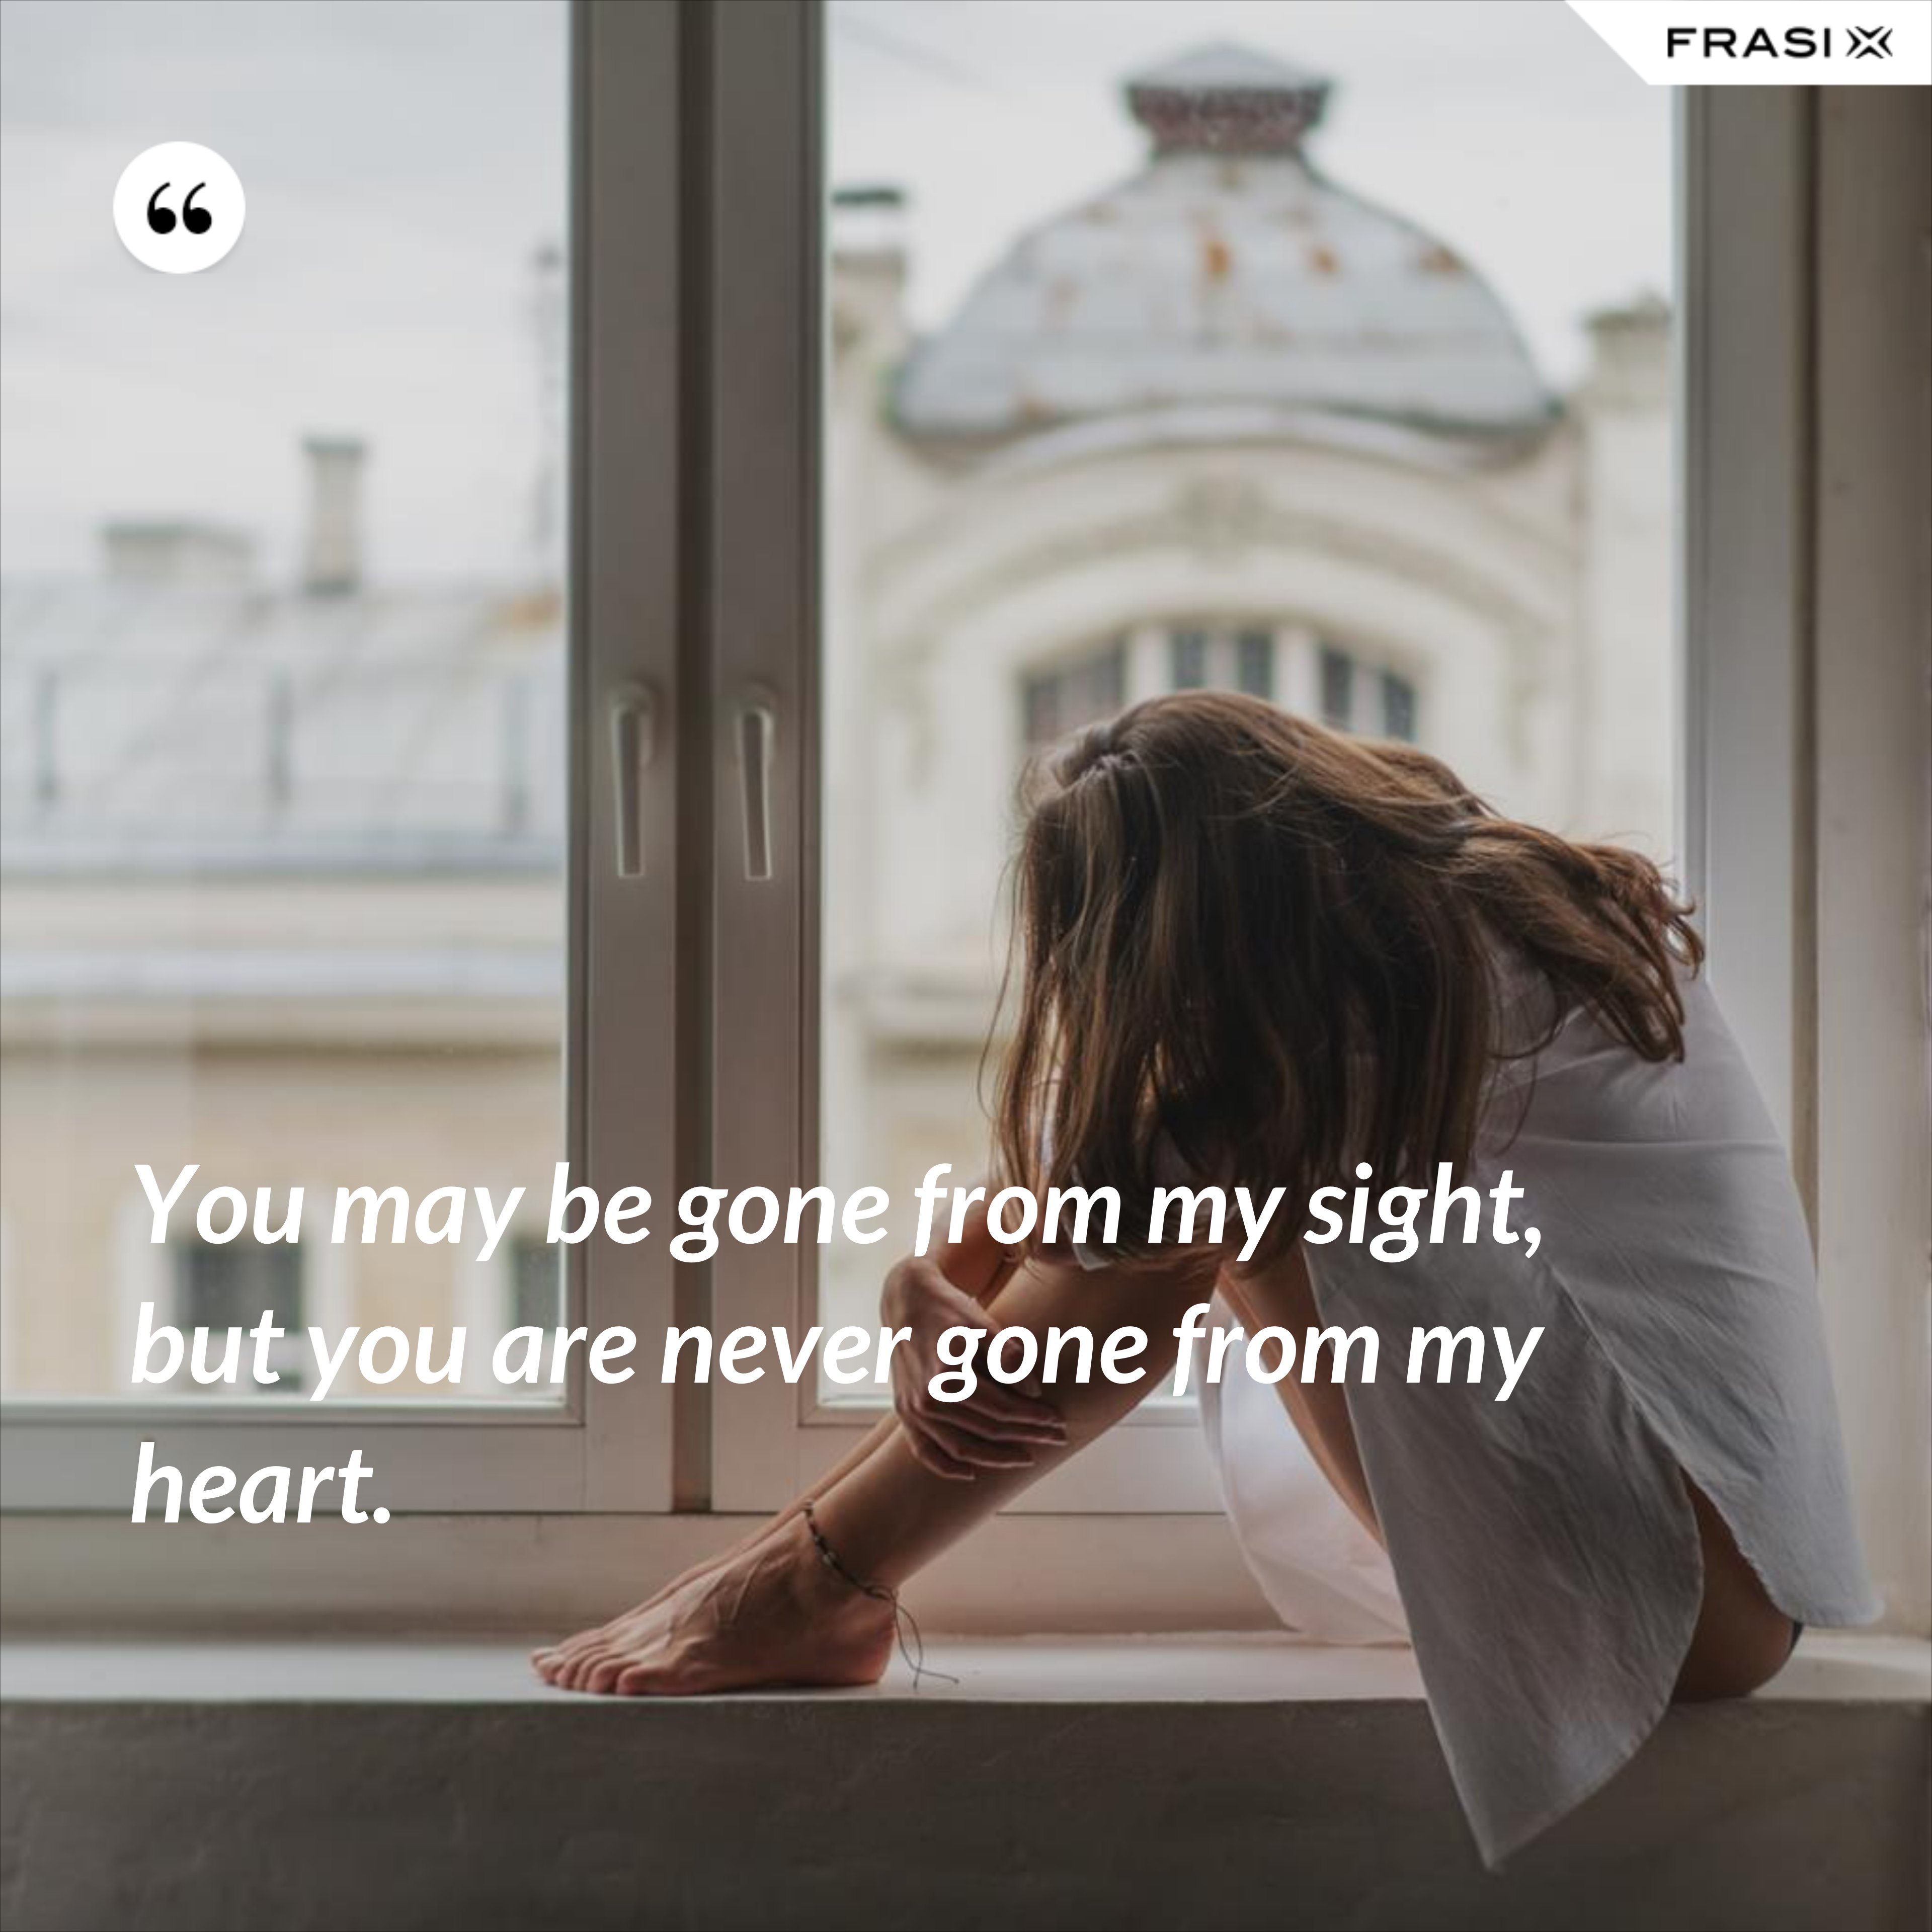 You may be gone from my sight, but you are never gone from my heart. - Anonimo